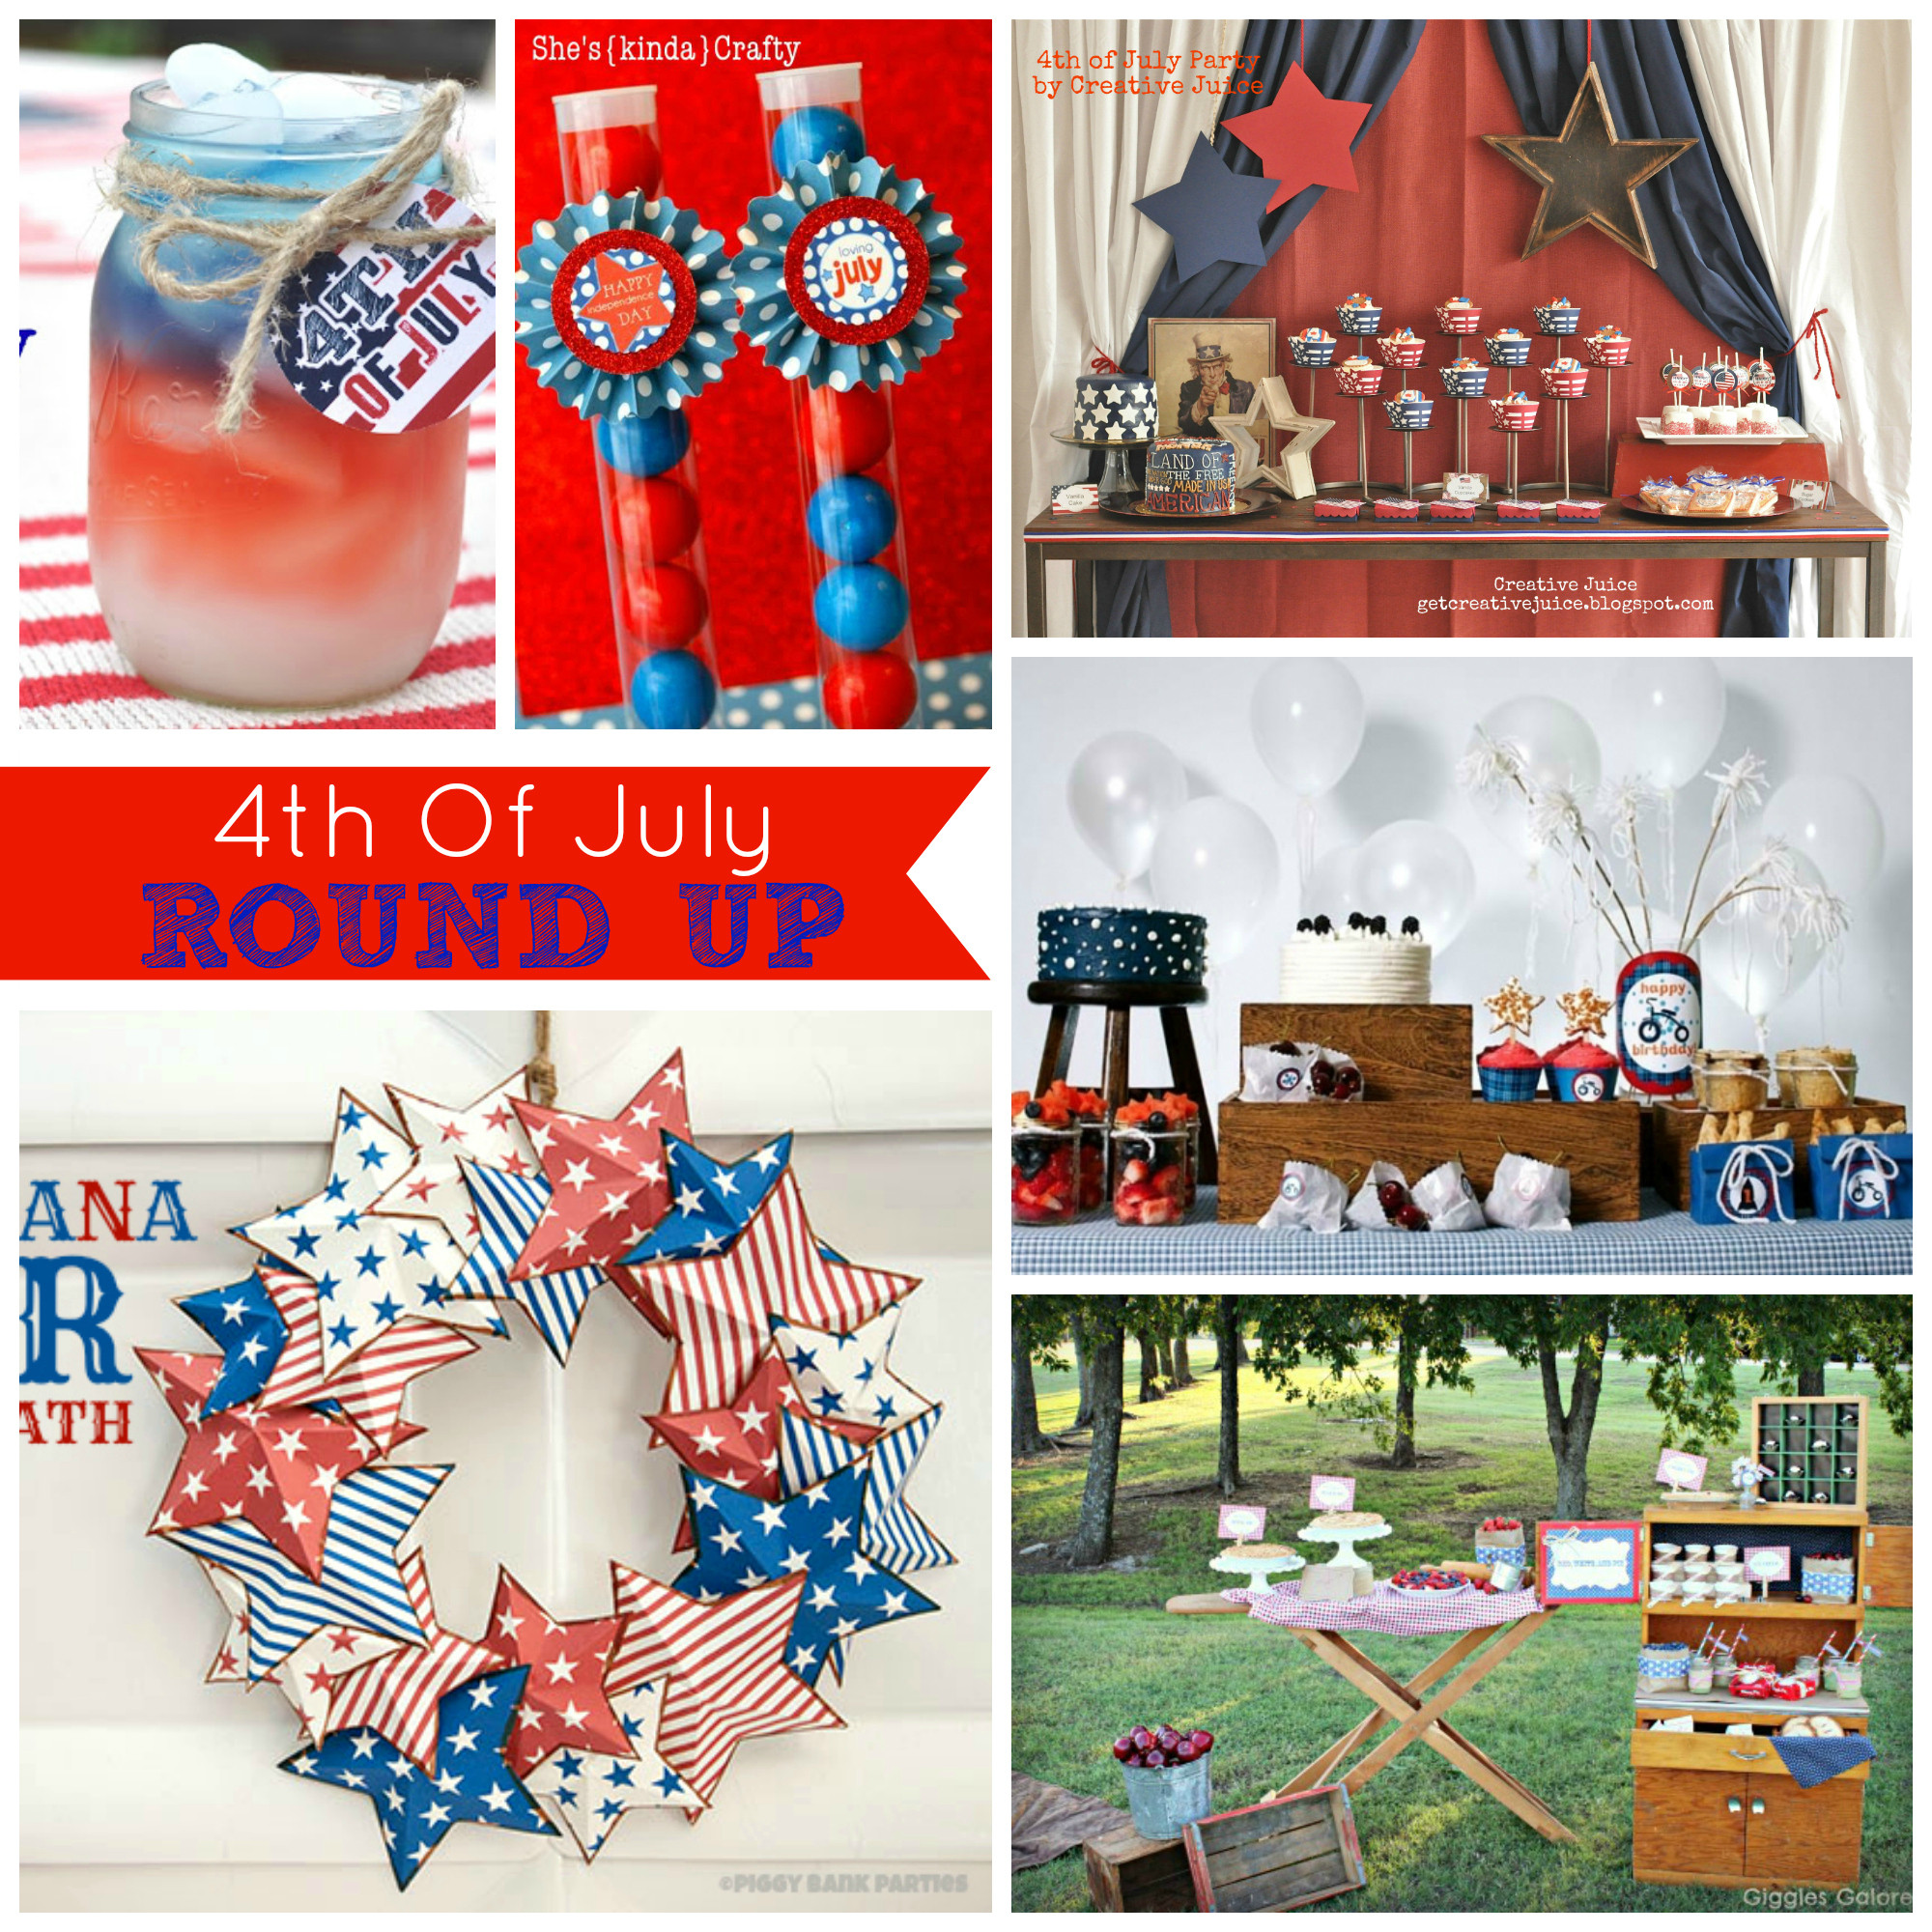 4th Of July Birthday Ideas
 Cupcake Wishes & Birthday Dreams Weekly Round Up 15